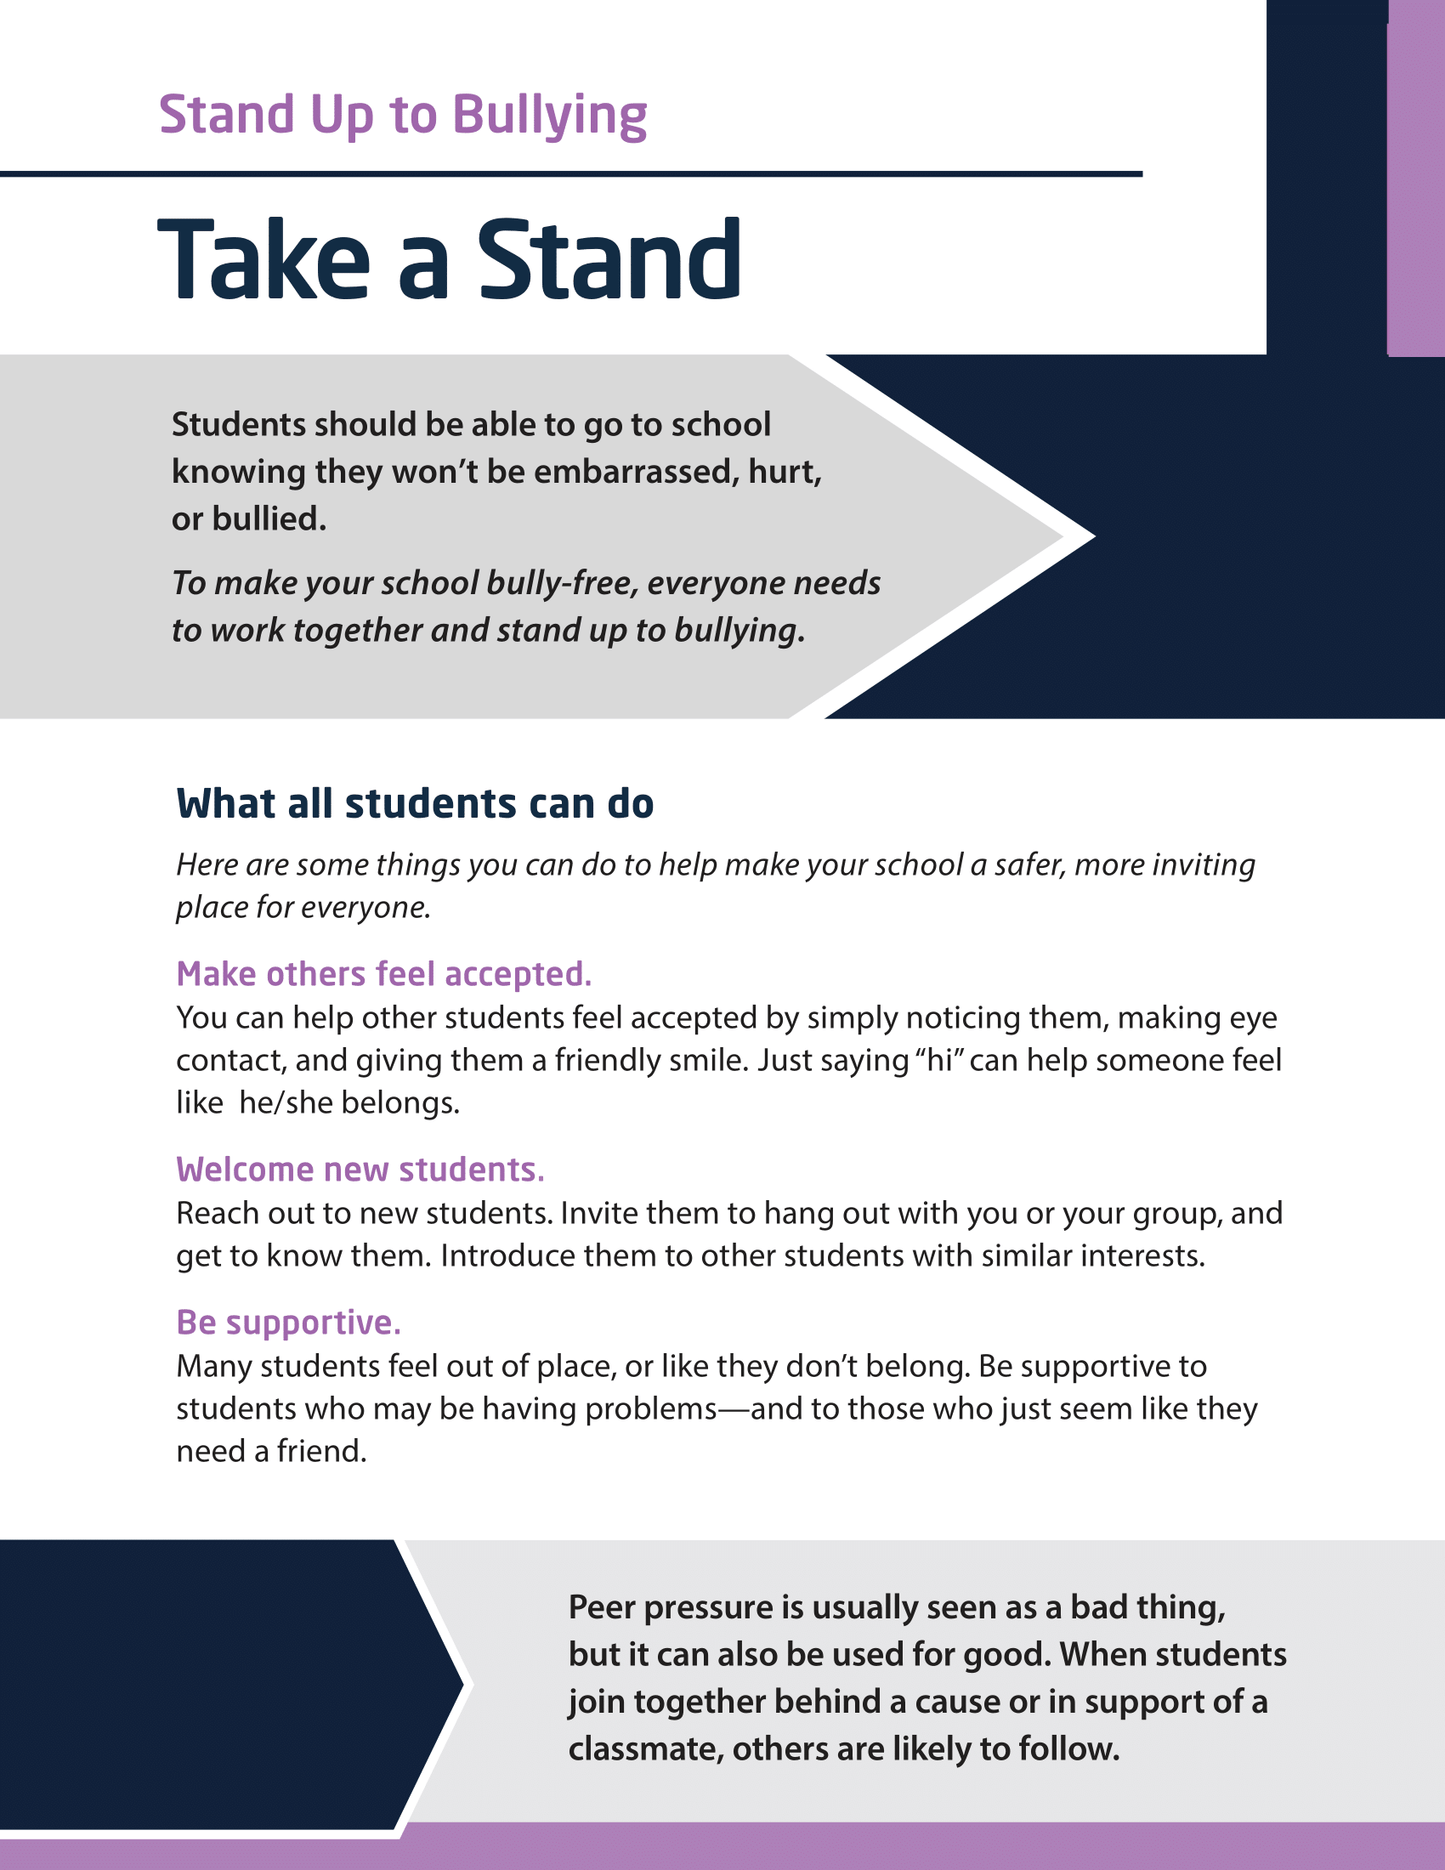 Stand Up to Bullying - Take a Stand